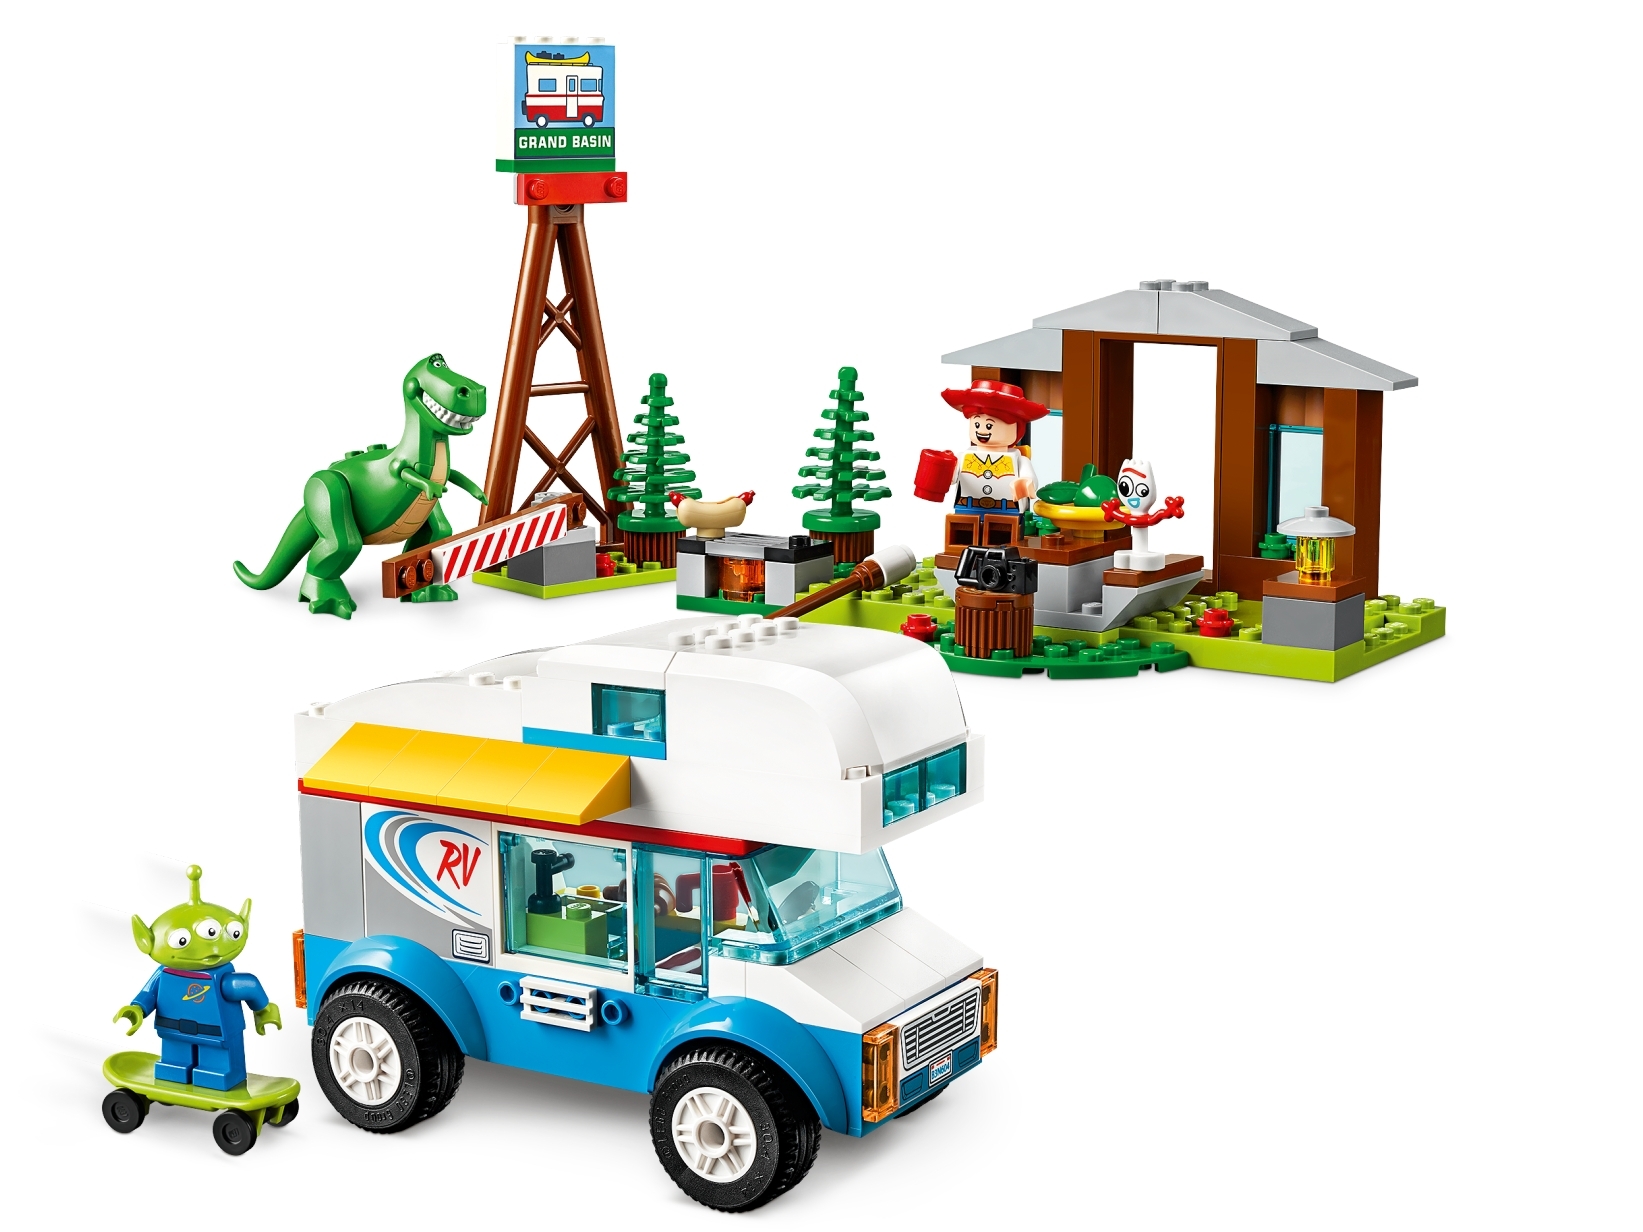 LEGO Toy Story Toy Story 4 RV Vacation Set for sale online 10769 